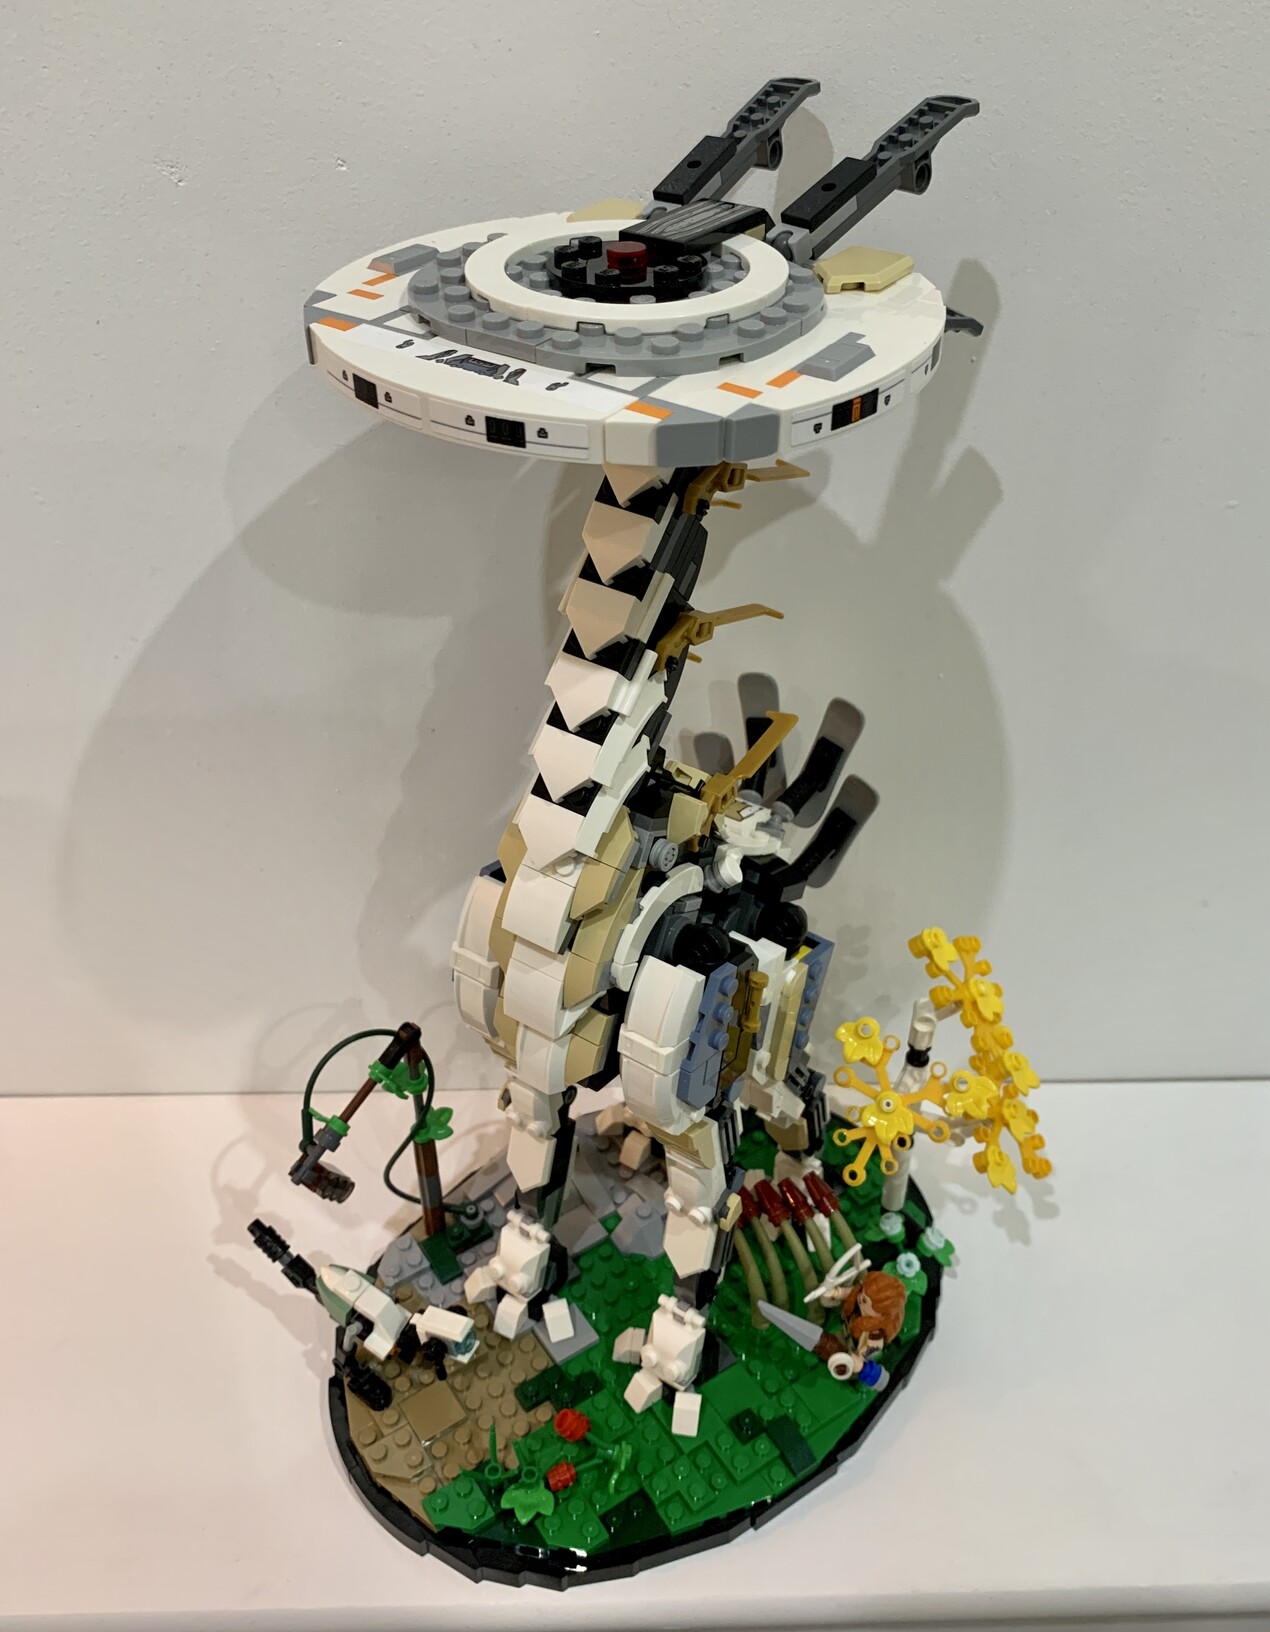 Lego Tallneck from the Horizon Forbidden West game. It is shaped like a giraffe, but made of white, grey and black robotic like parts. It is stood on a grassy base with the character Aloy (human with red hair) and a small dog like robot